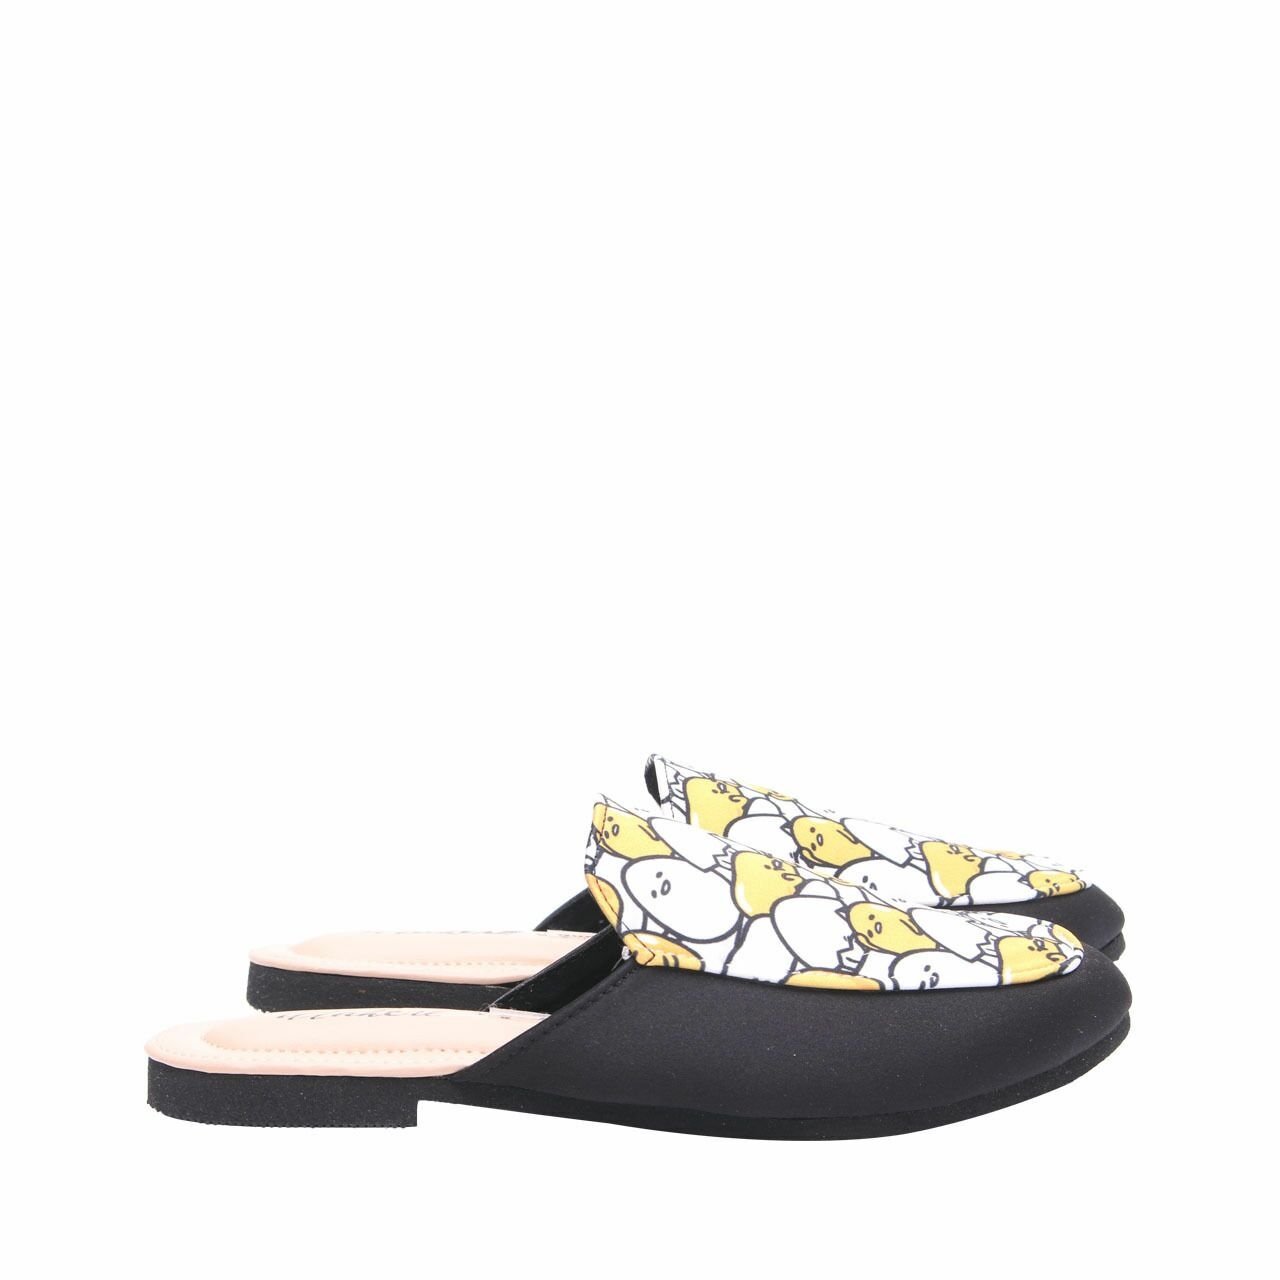 Ittaherl Black The Lazy Egg Sitprers Mules Sandals